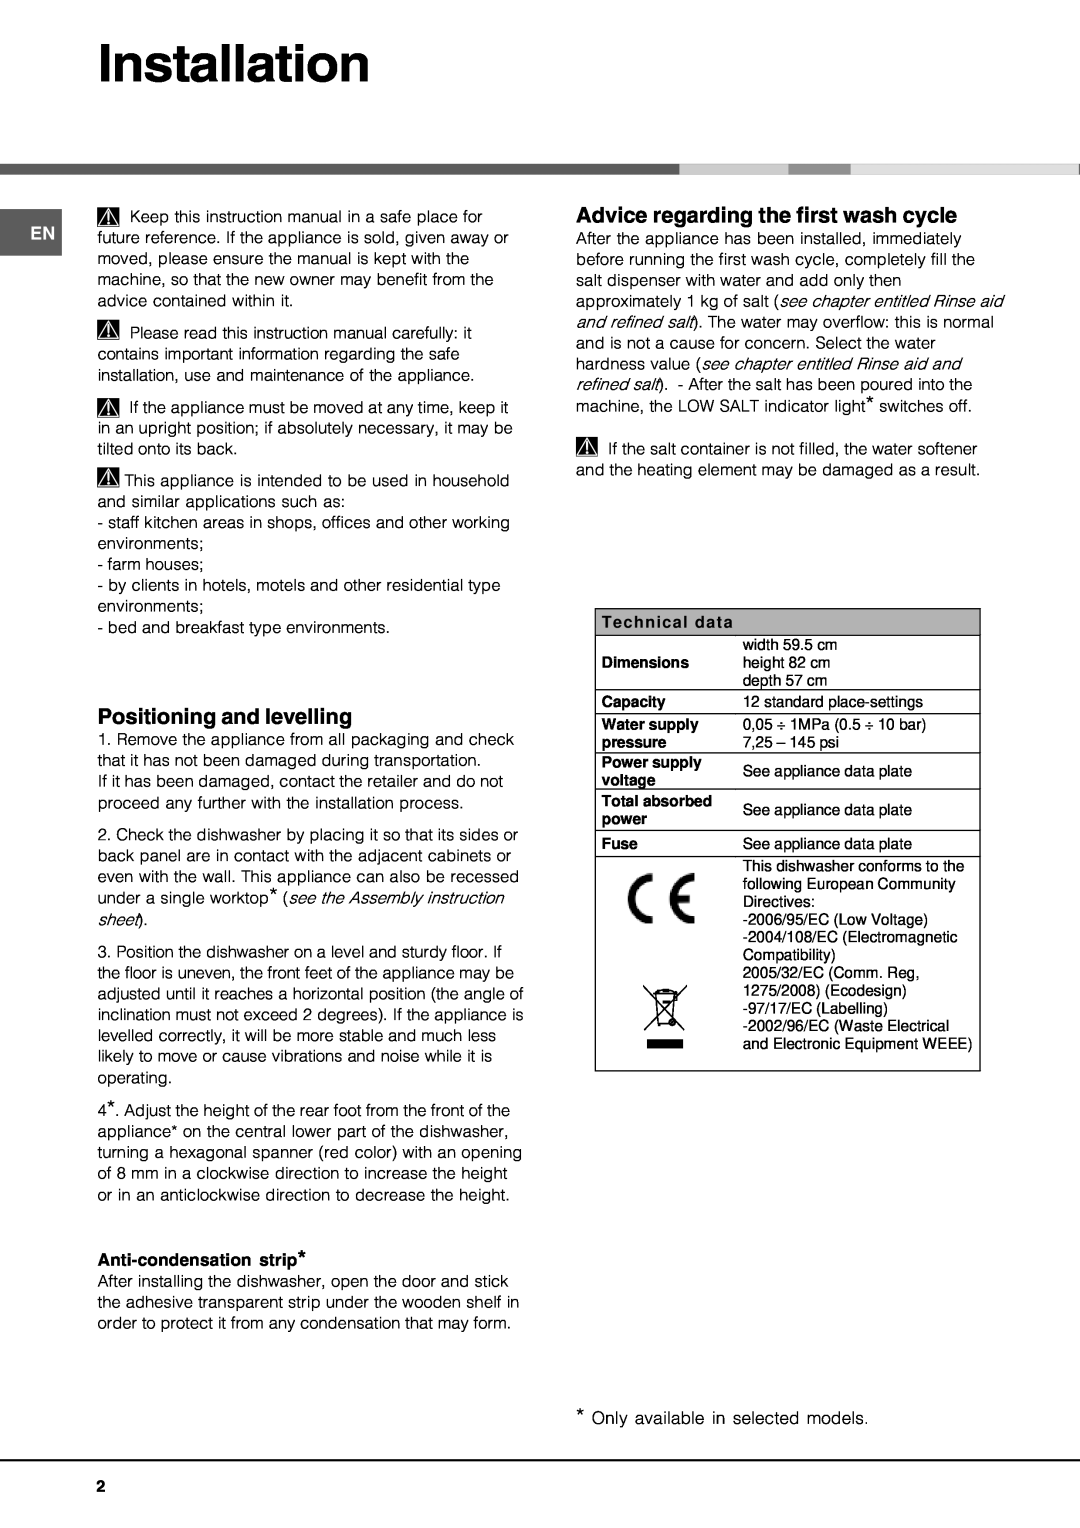 Hotpoint lft 04 manual Installation, Positioning and levelling, Advice regarding the first wash cycle 